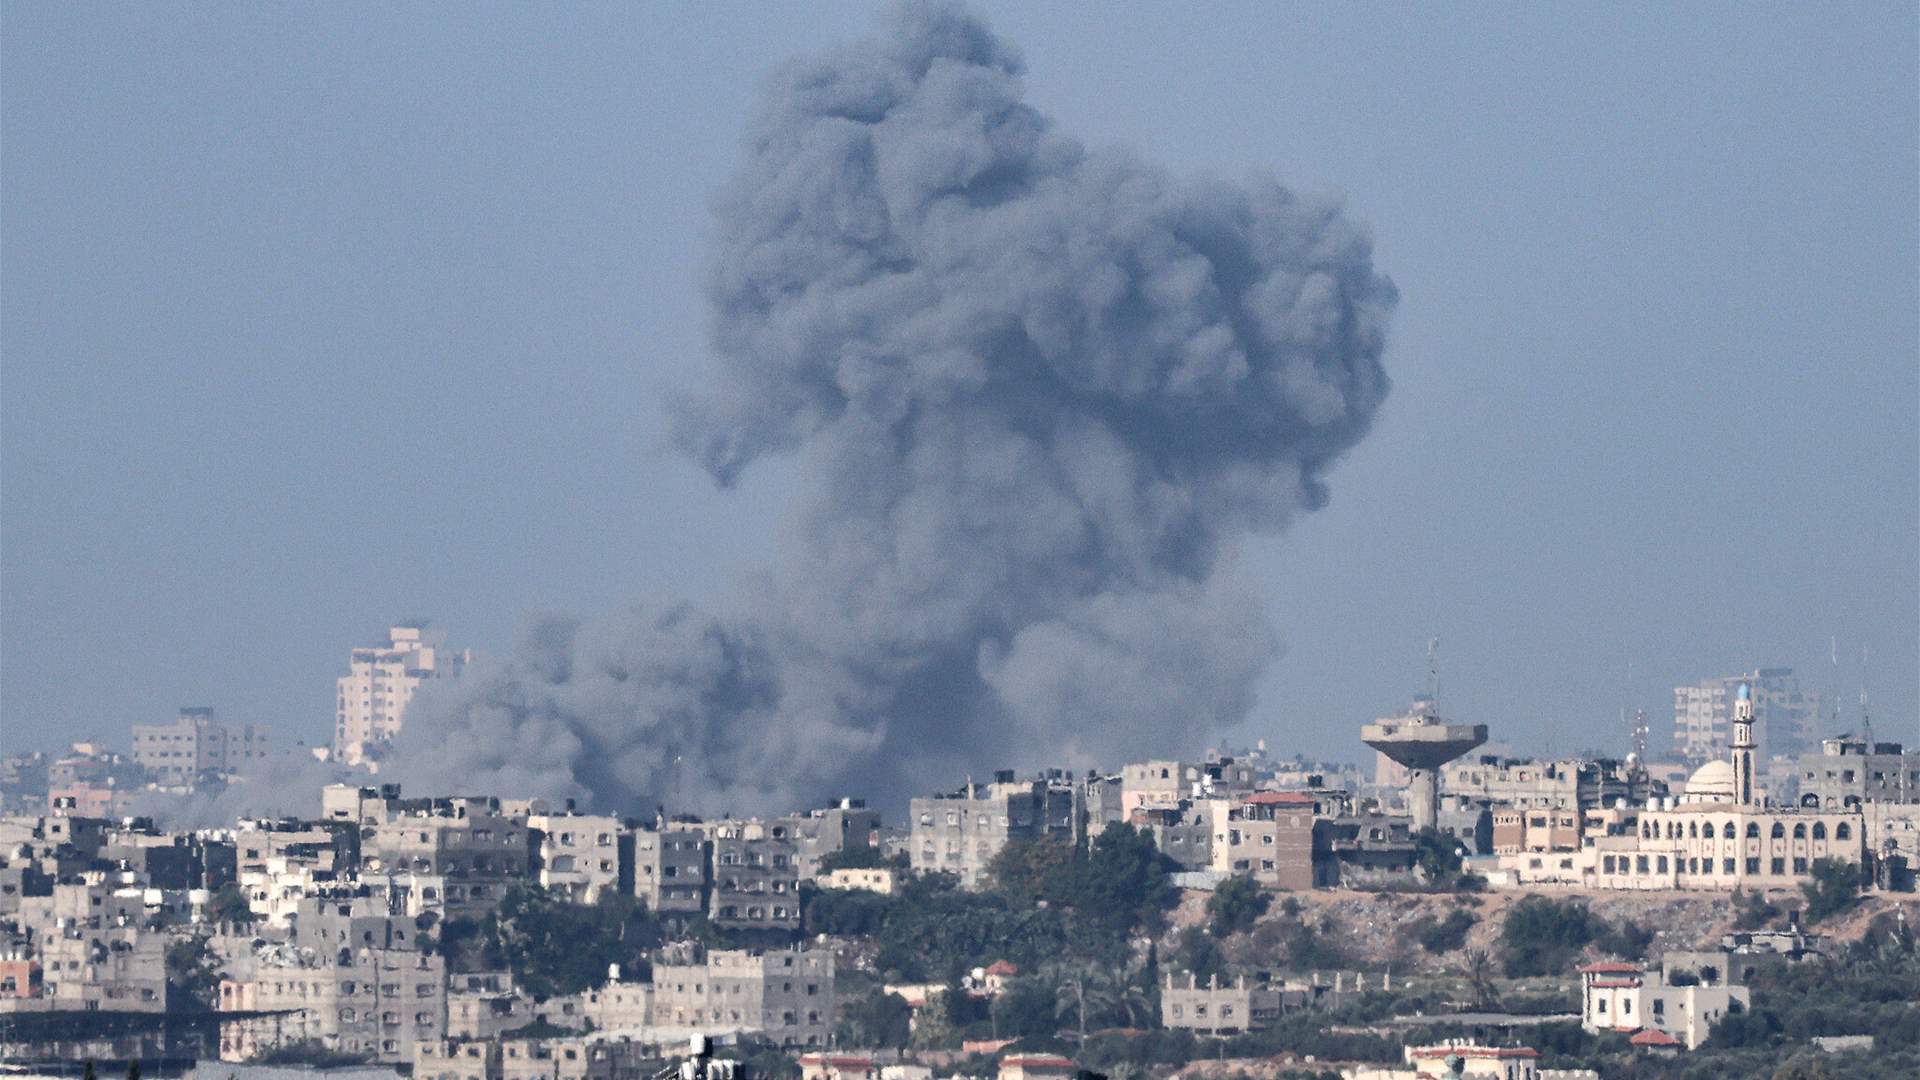 Strained truce talks: Challenges amid ongoing Israeli actions in Gaza and Lebanon